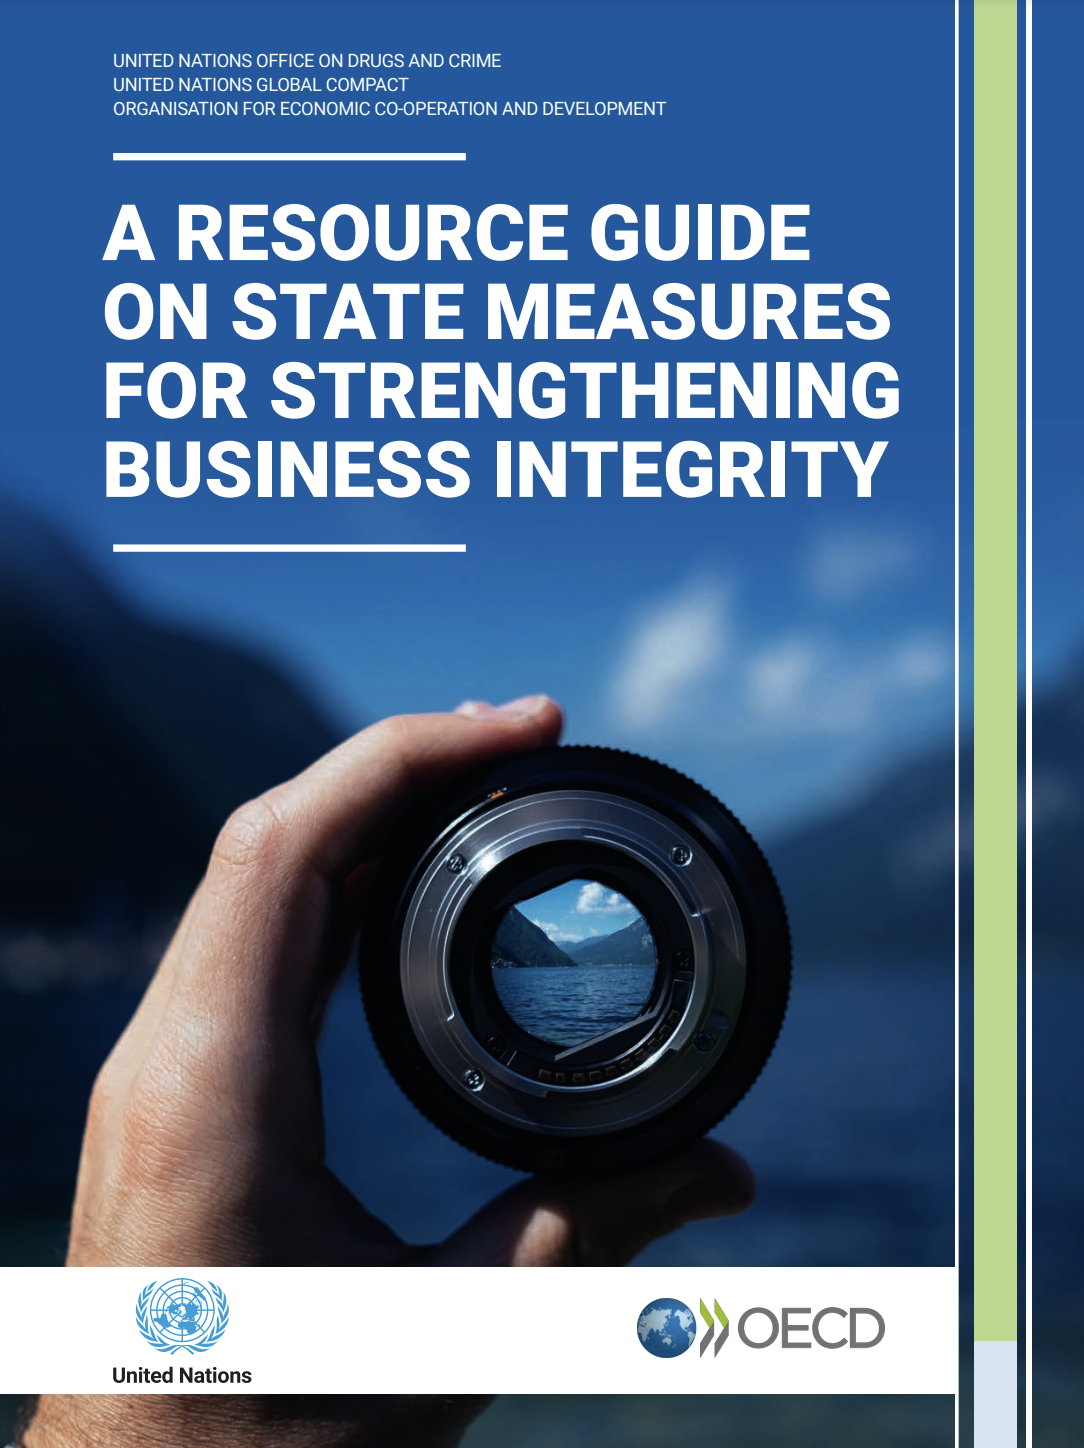 Resource Guide on State Measures for Strengthening Business Integrity